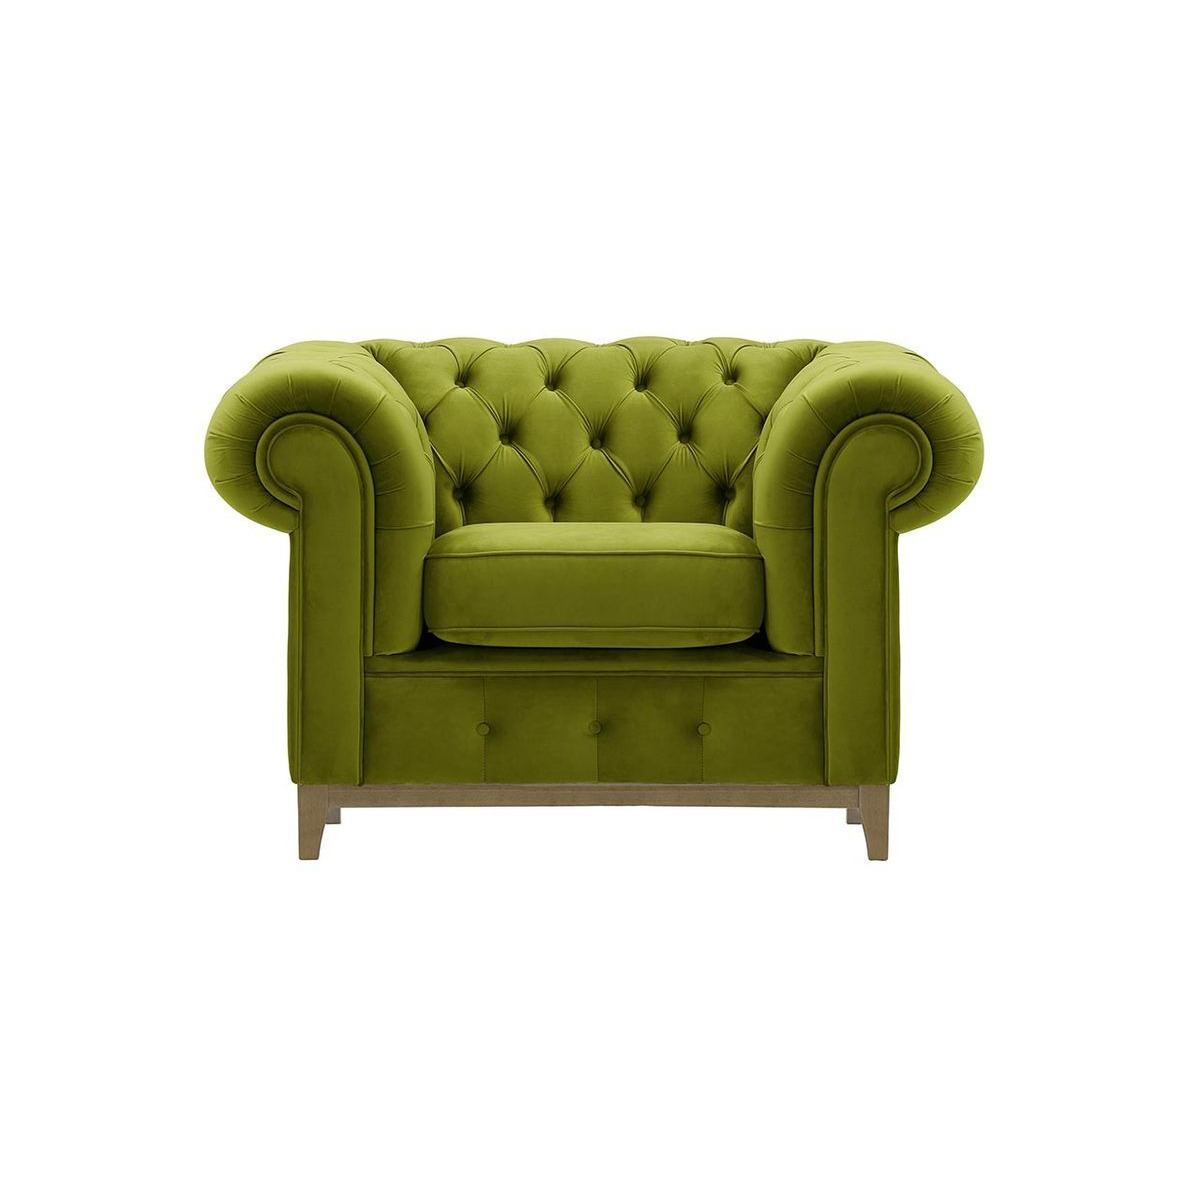 Chesterfield Grand Armchair, olive green, Leg colour: wax black - image 1